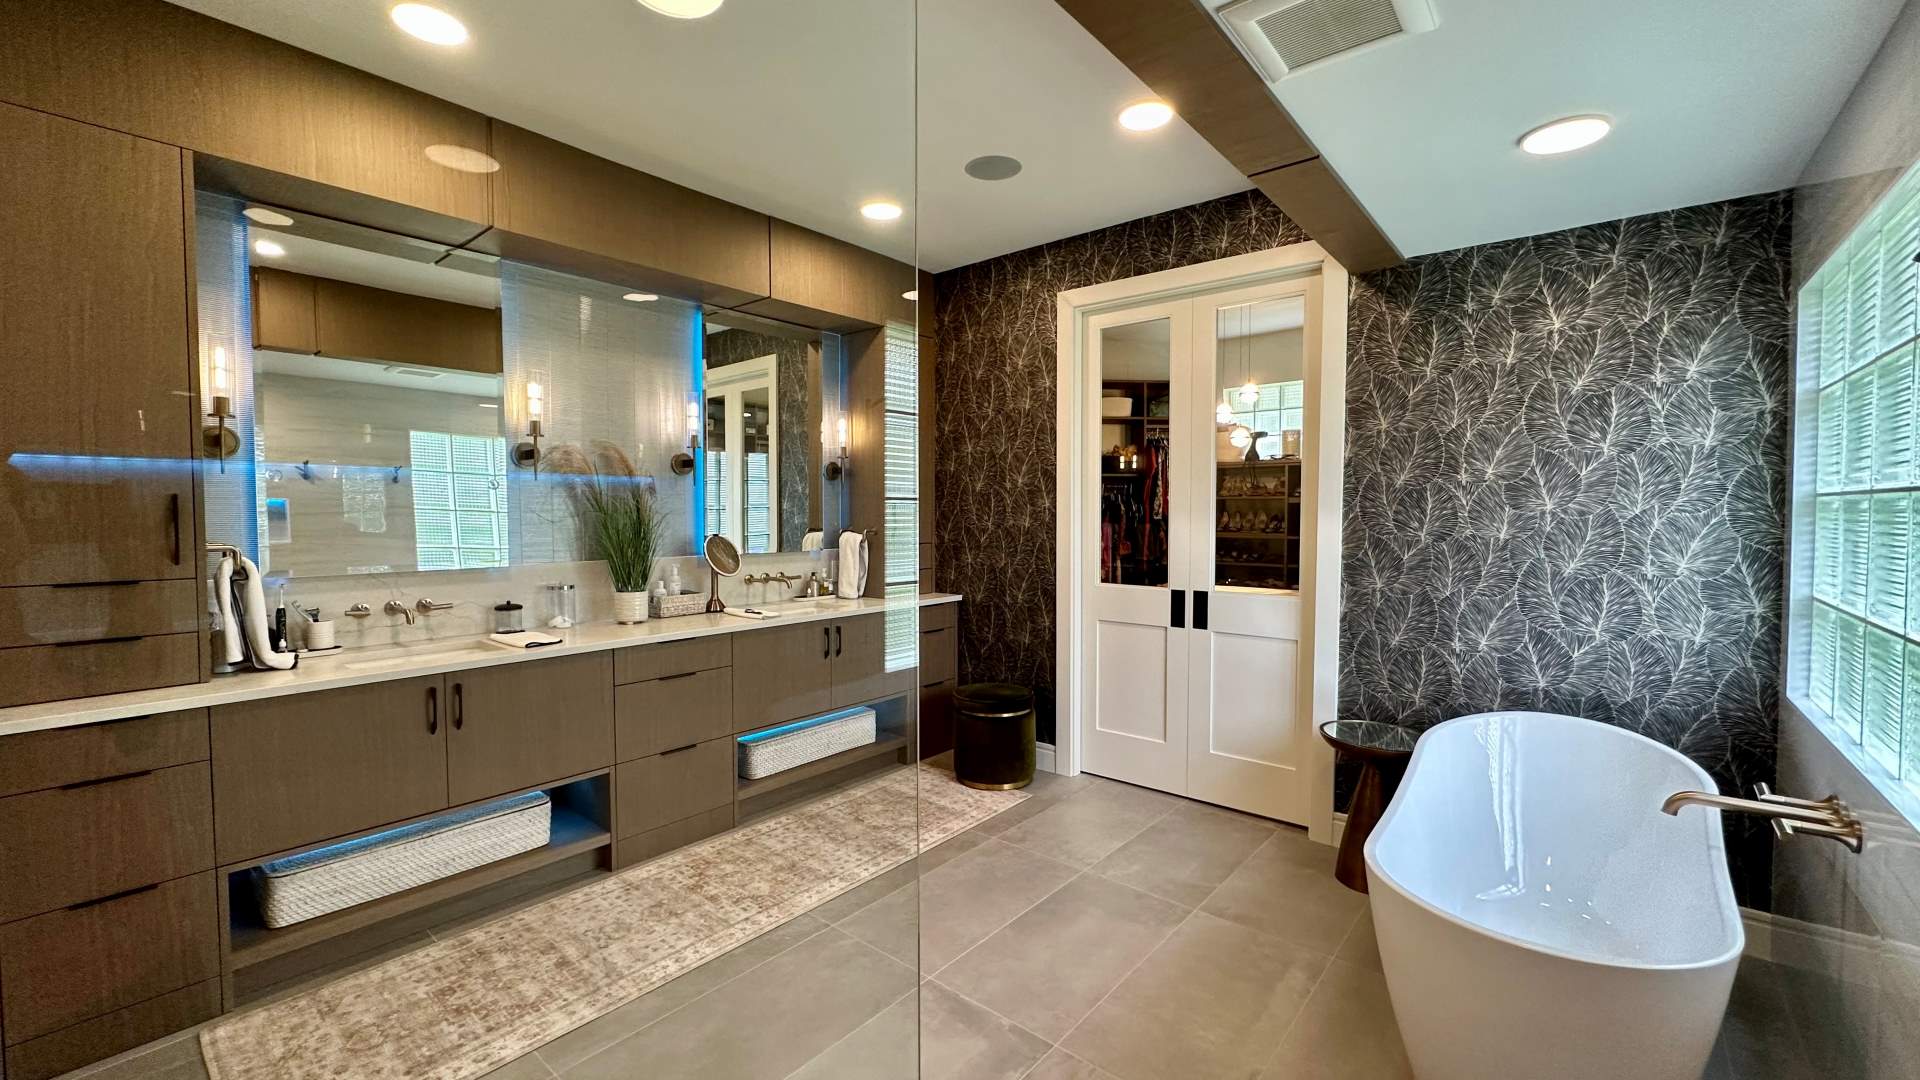 The Definitive Guide to the Average Cost of Bathroom Remodel in 2023